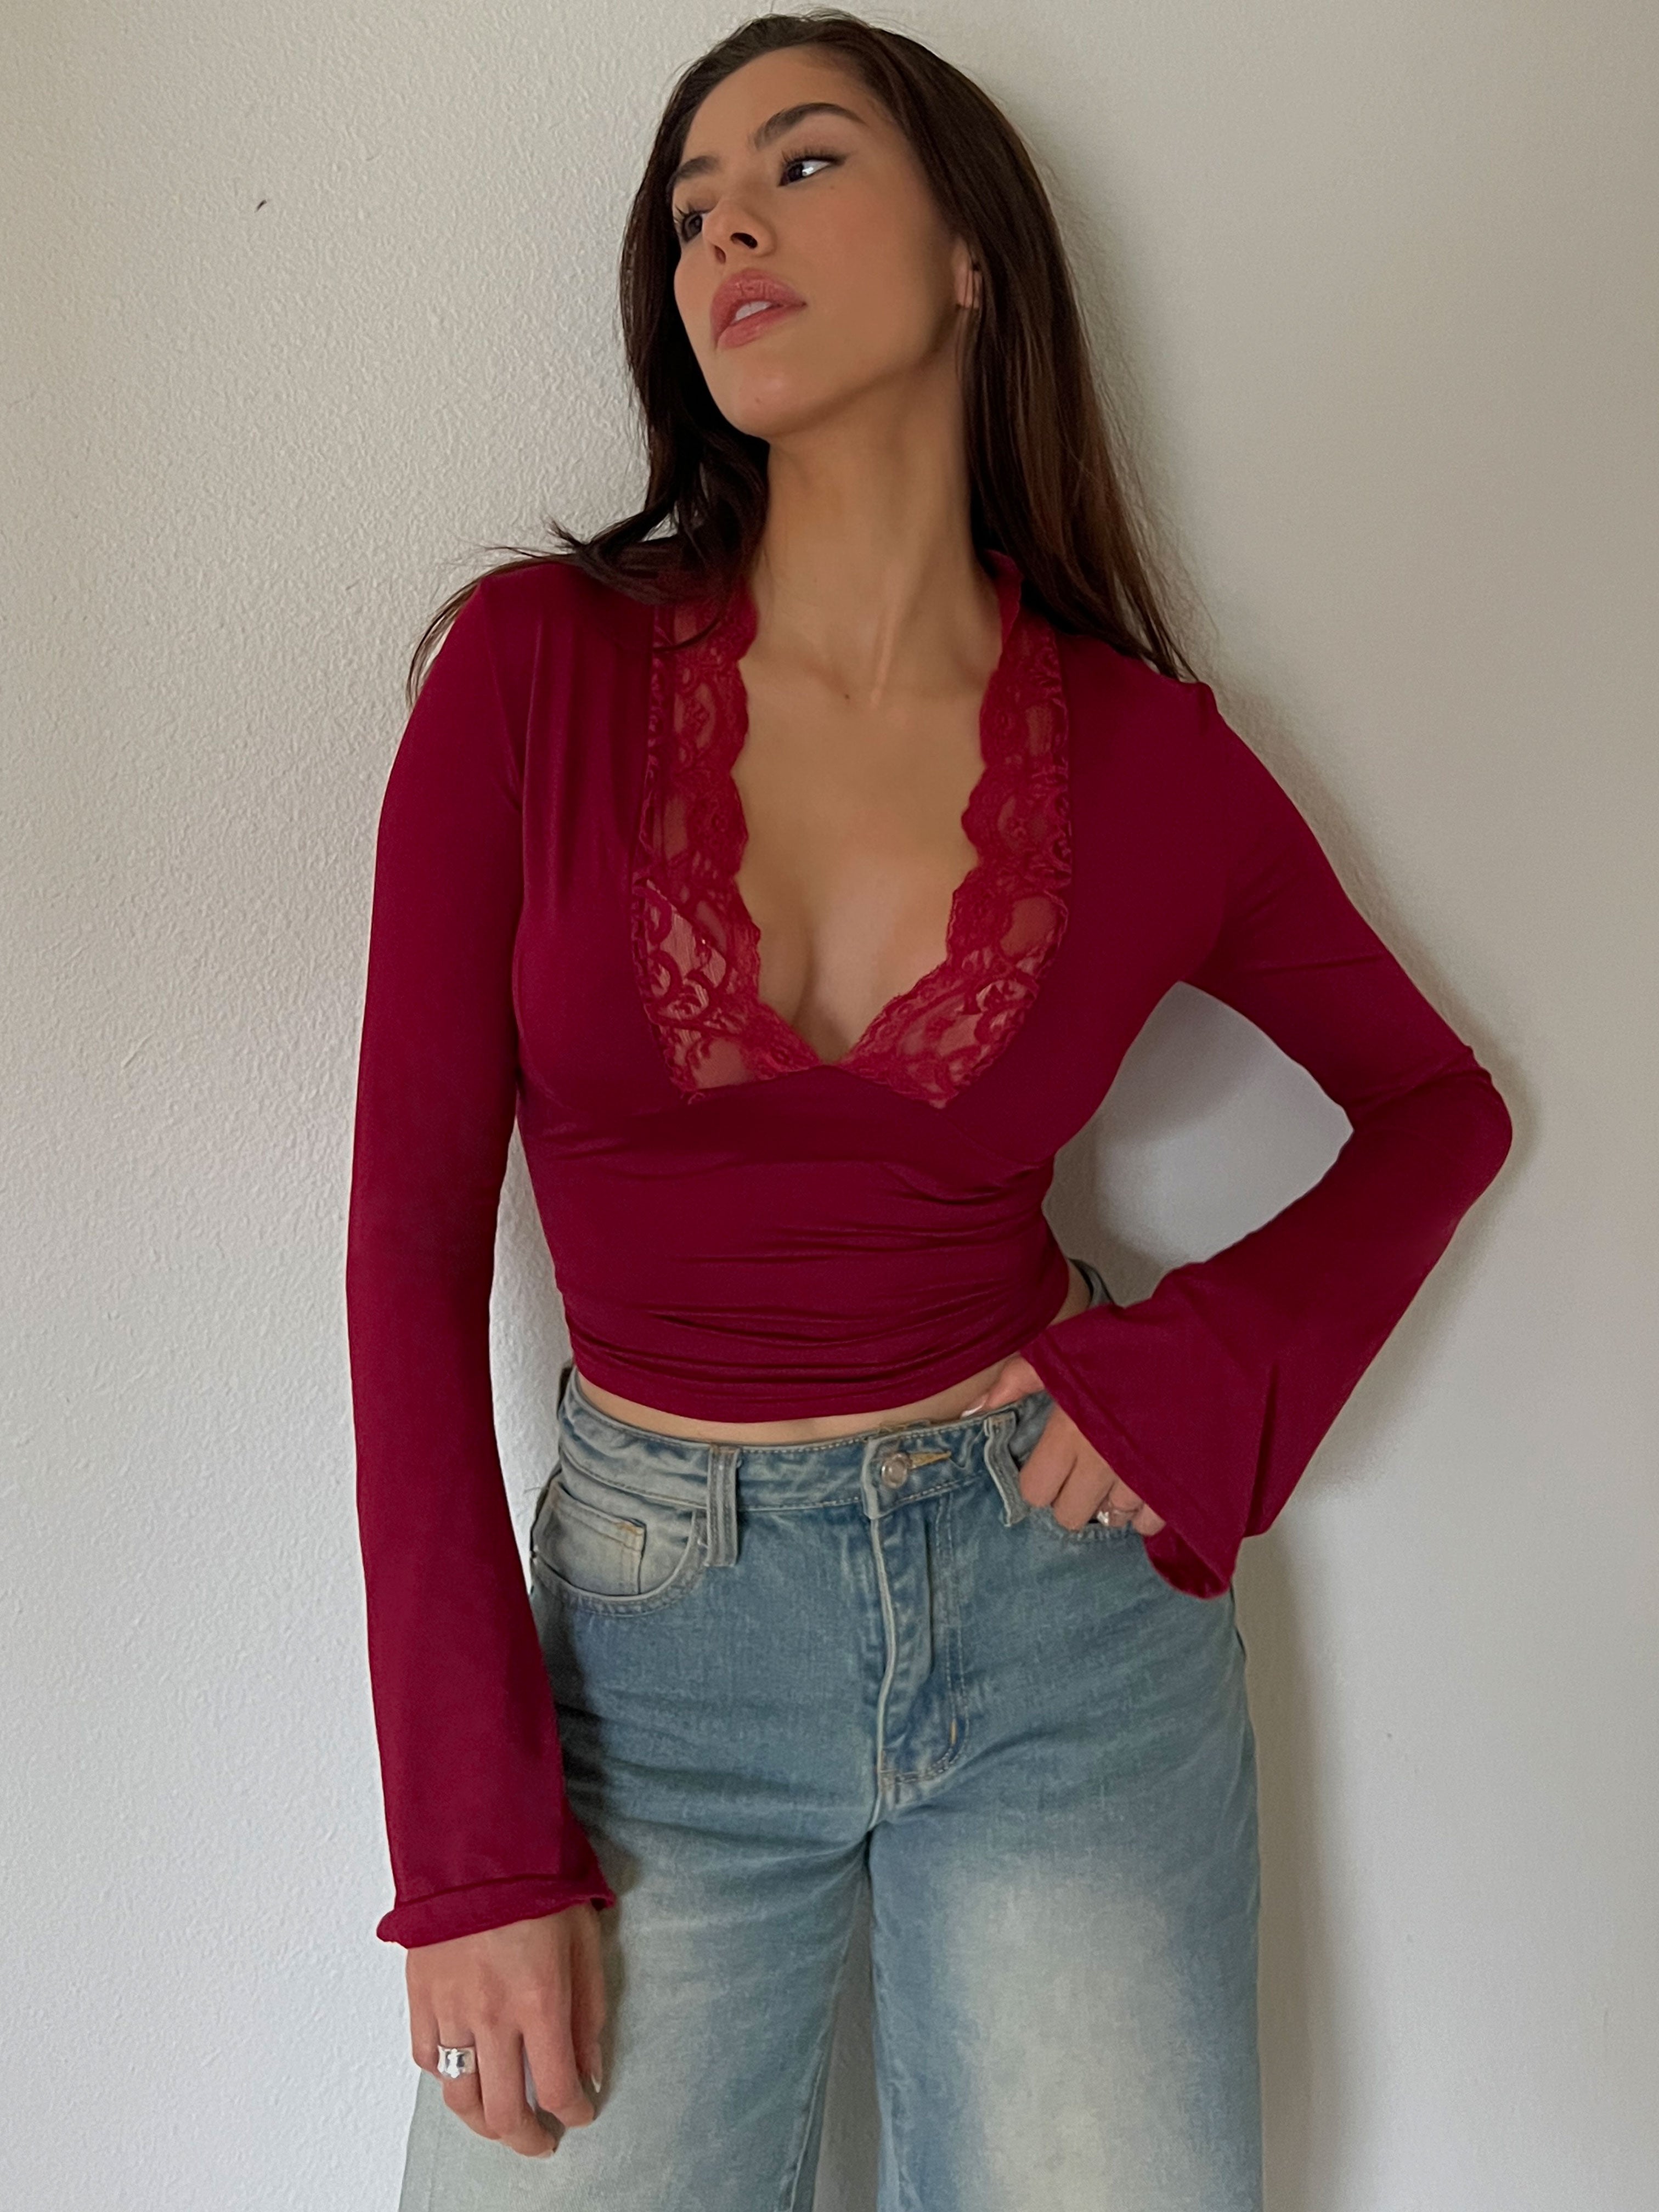 Veyles's Lace Top Perfect Fit Wine Red